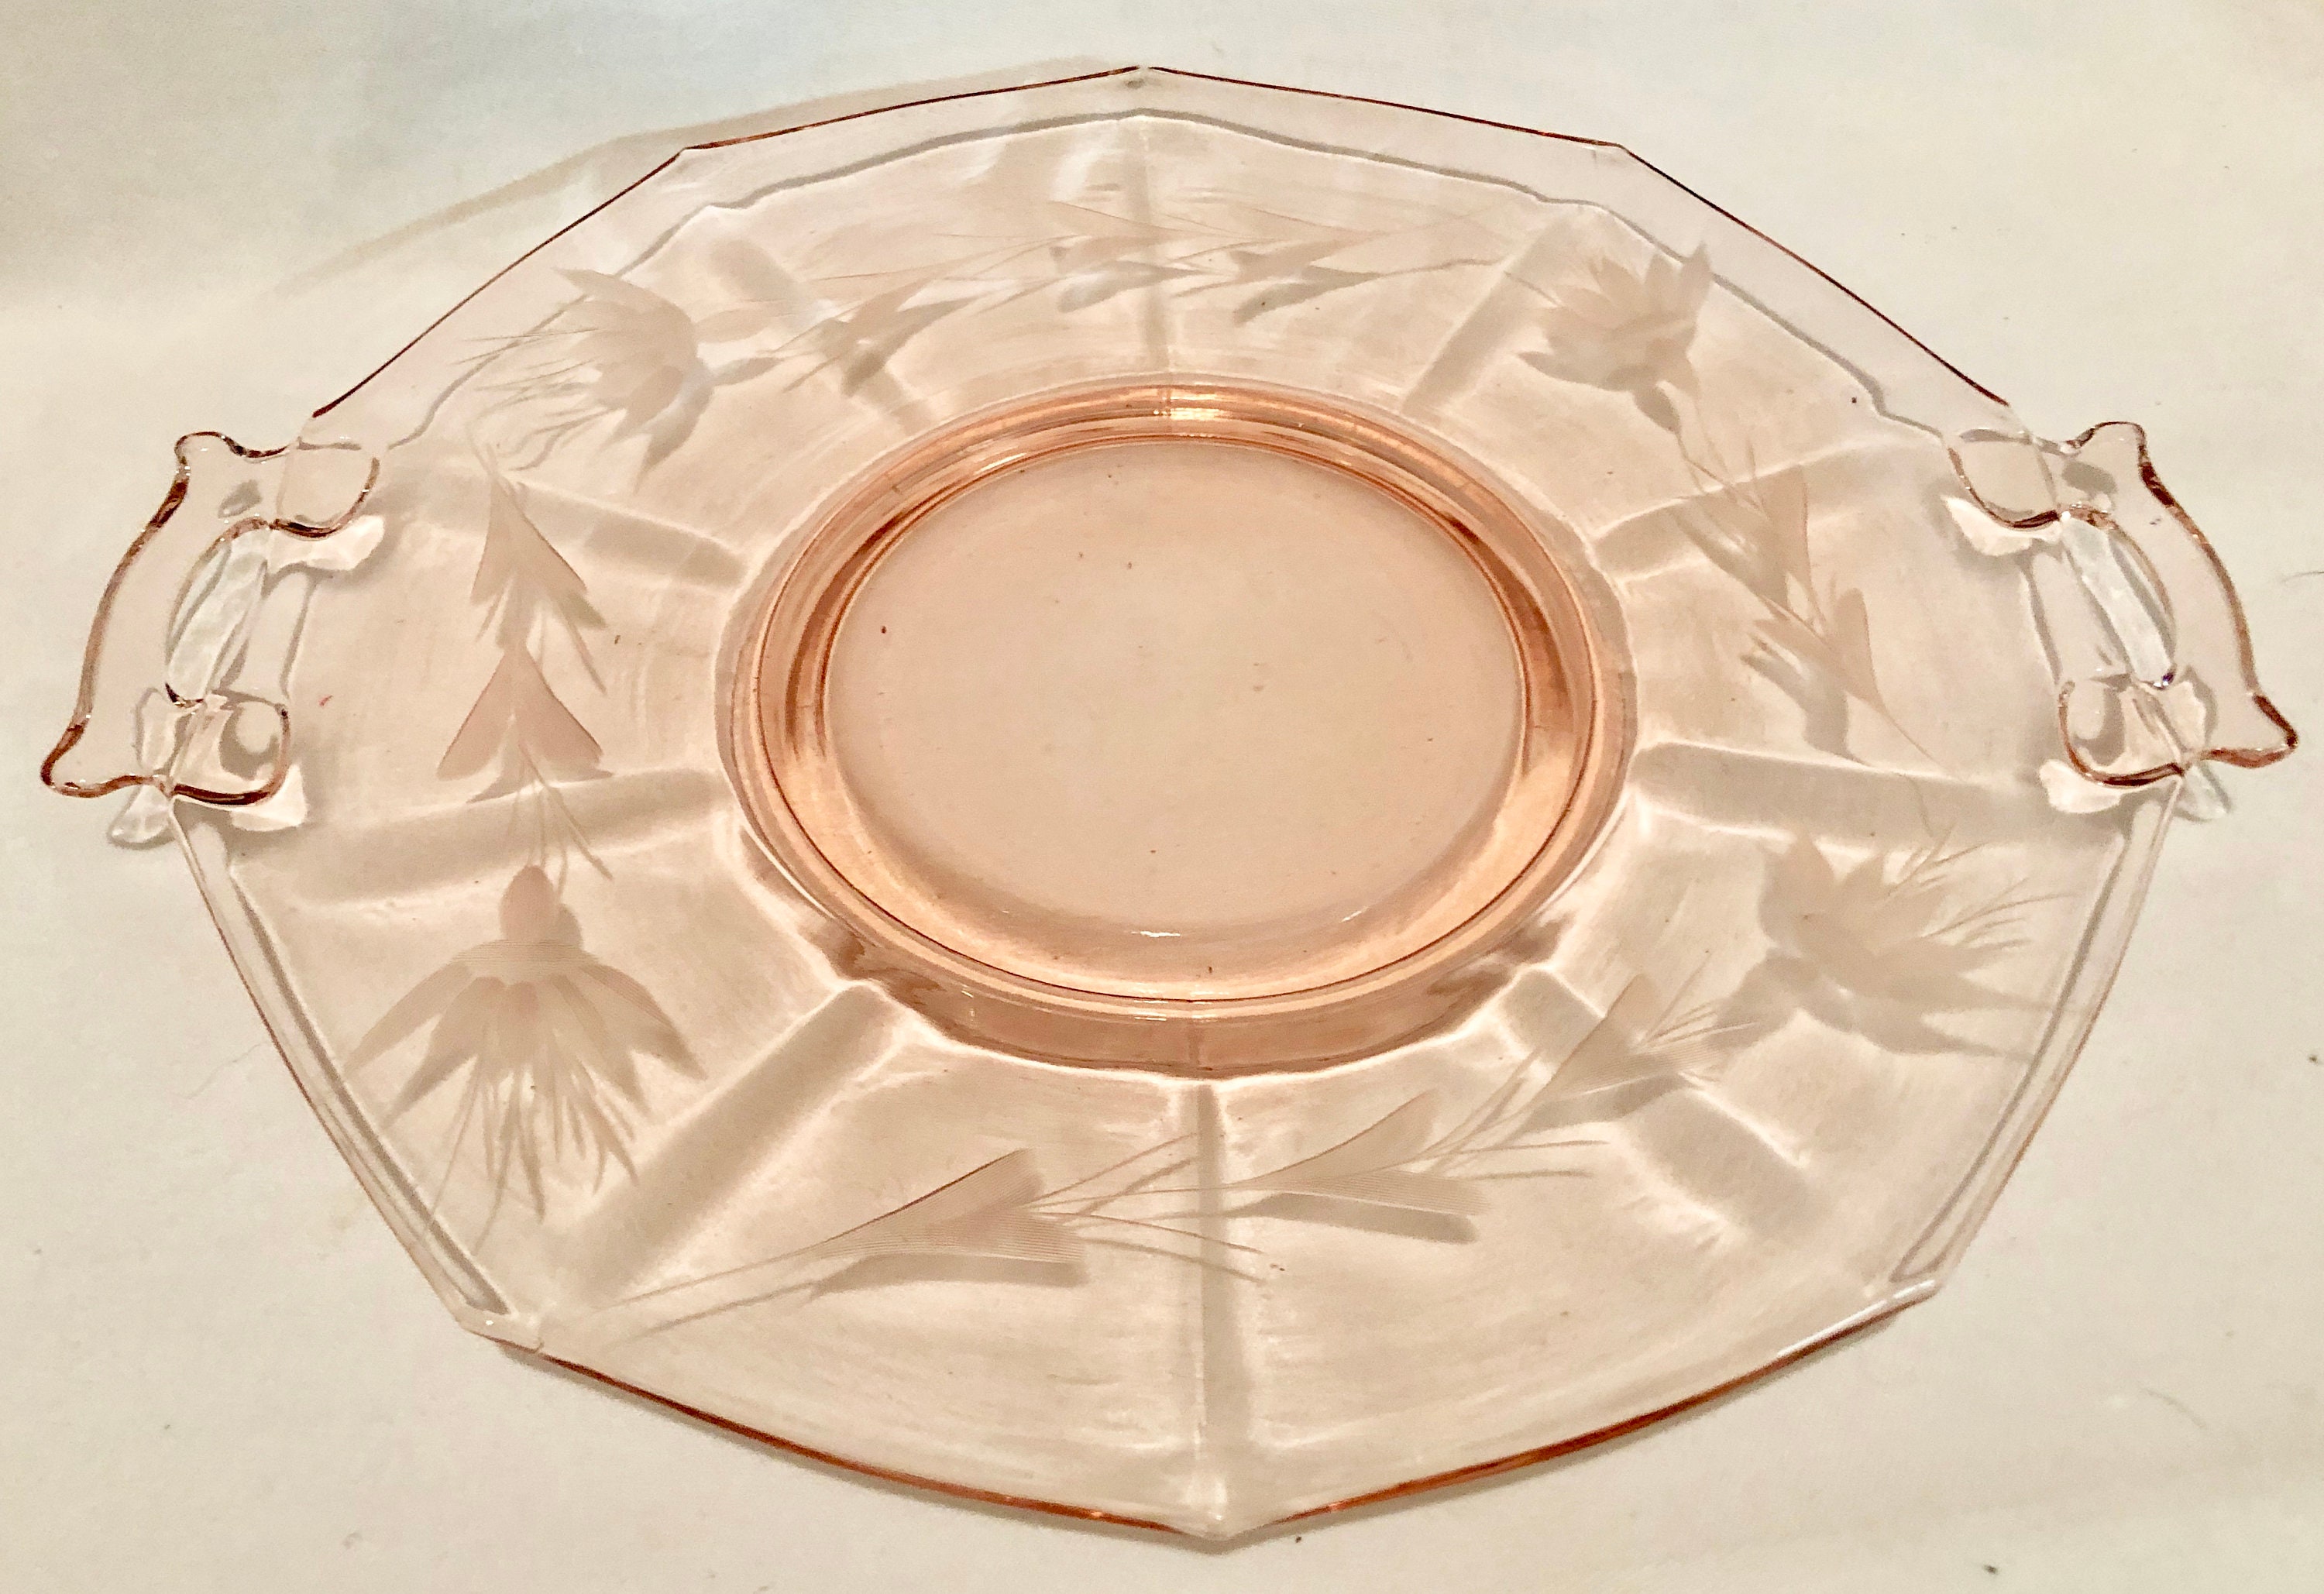 Vintage Blush Pink Depression Glass Cake Serving Plate With Etched